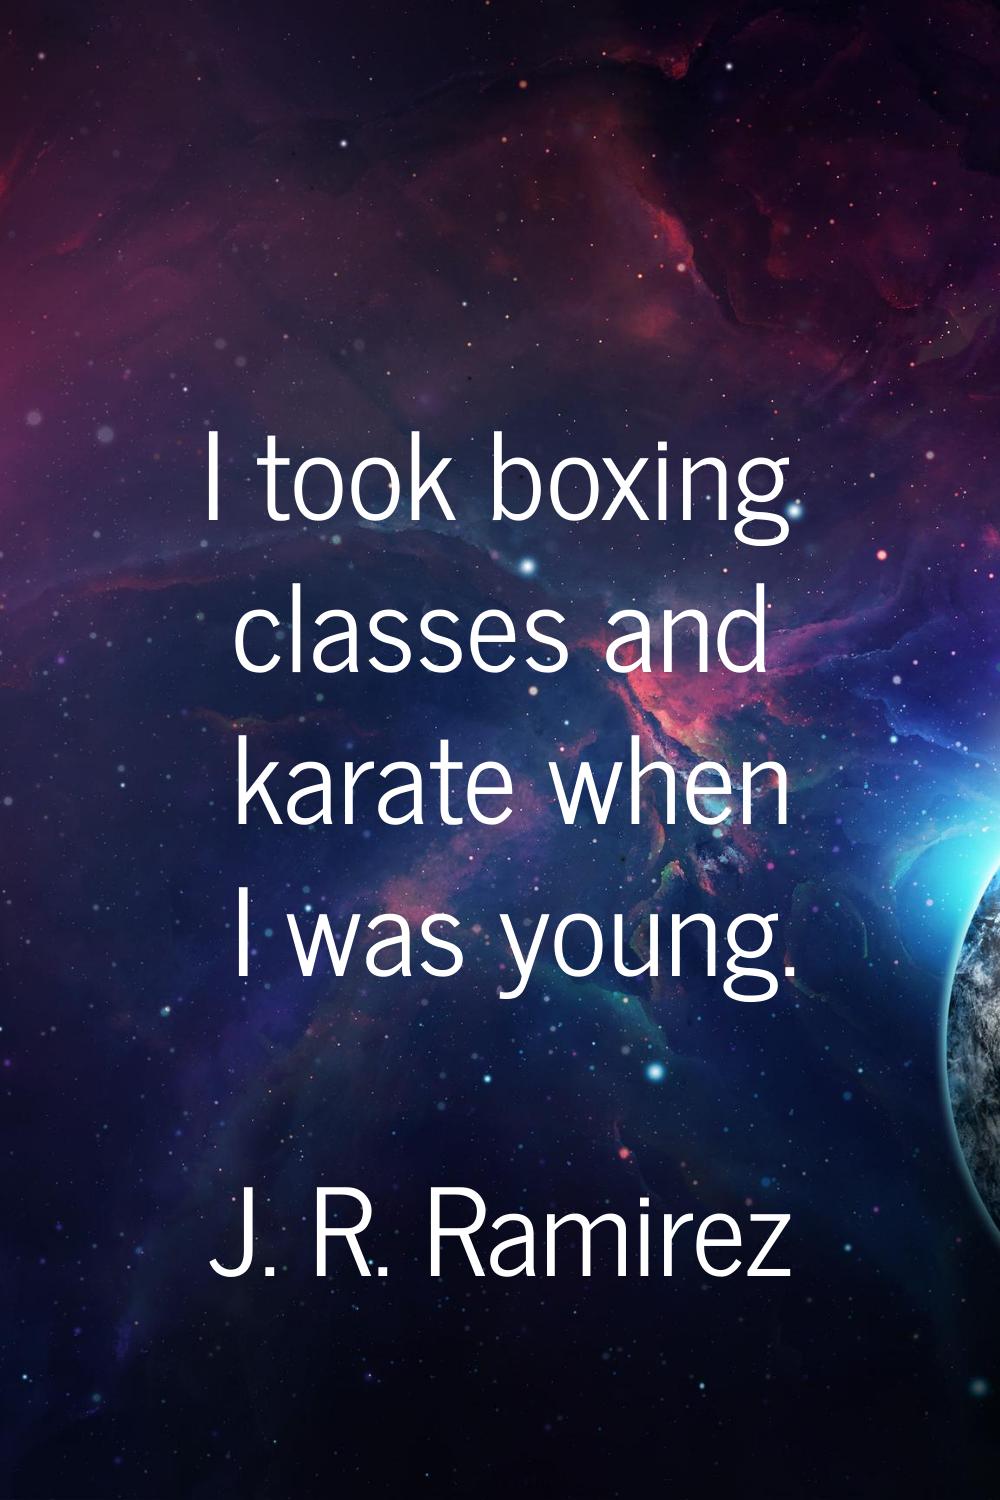 I took boxing classes and karate when I was young.